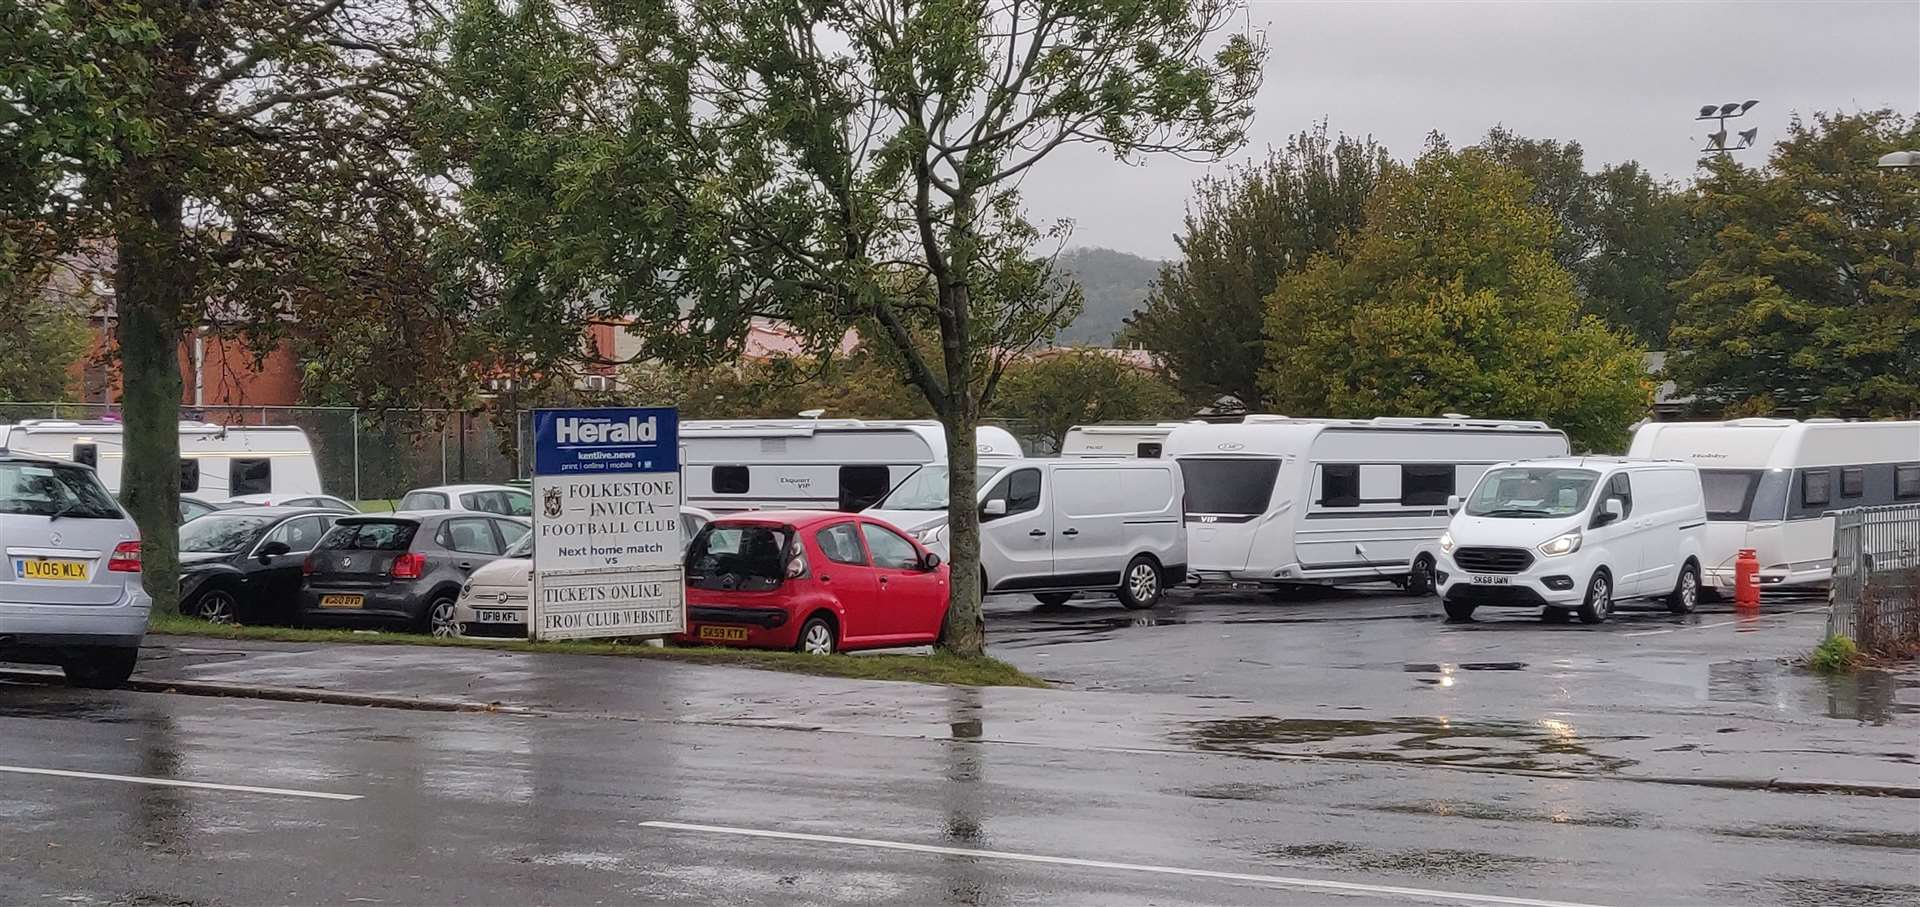 The caravans arrived overnight. Picture: Rhys Griffiths